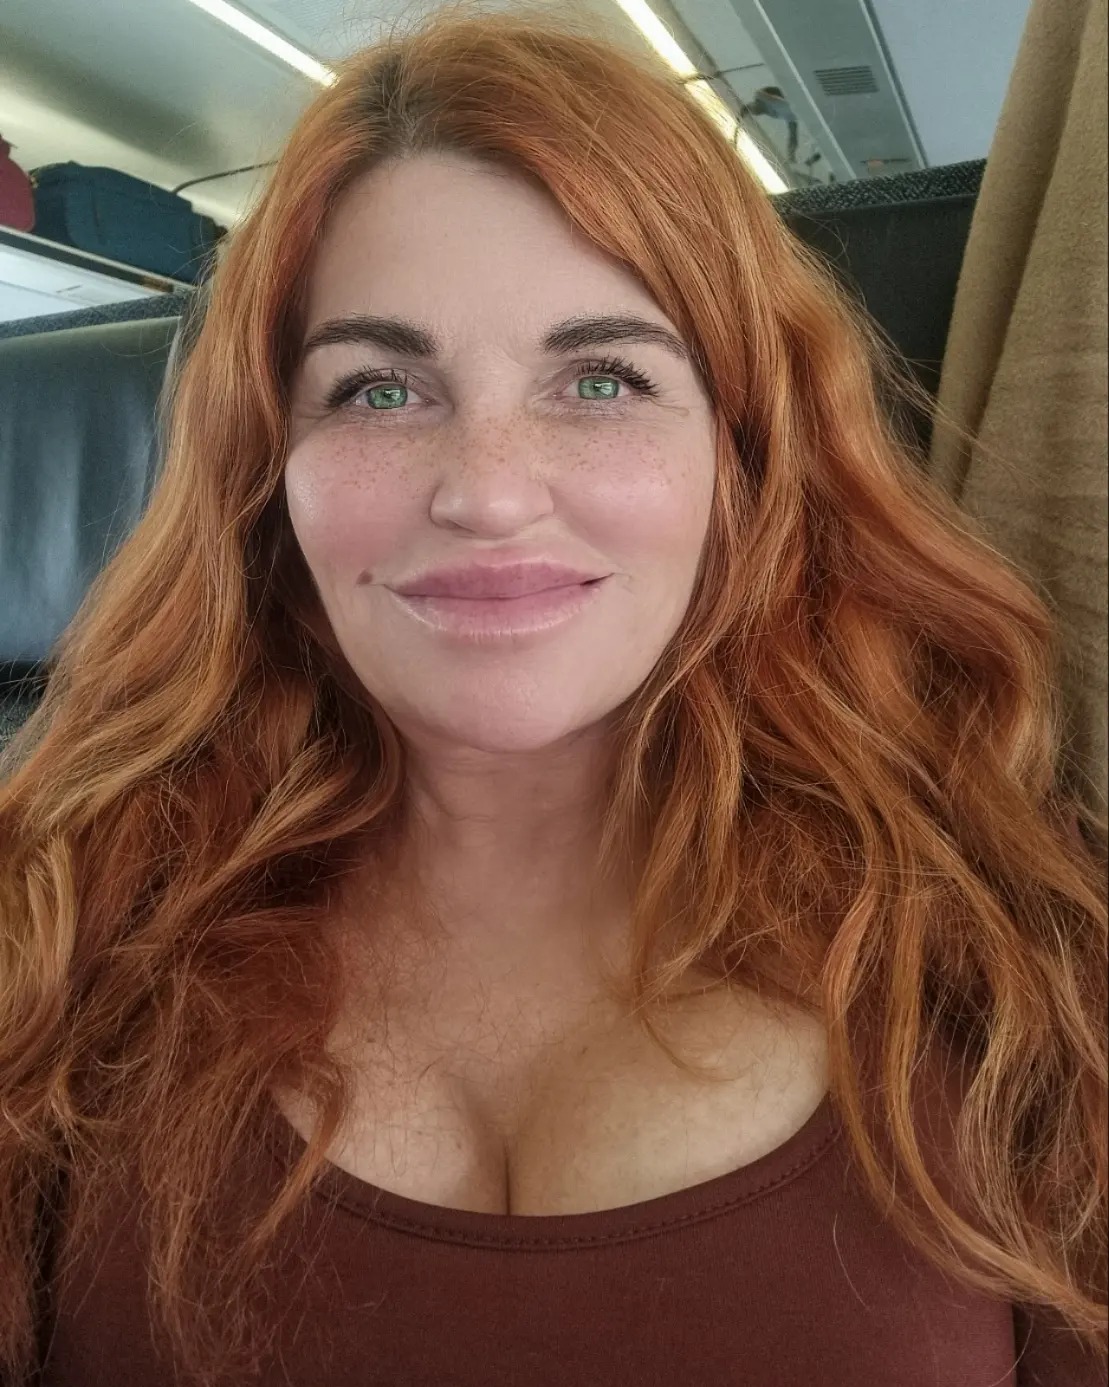 Summer is arriving, and so are my freckles. 
Remember to be good to yourself and to each other and to all the animals you meet on your way ✨️ 
.
.
.
.
.
.
.
#redhead #redheads #gingers #gingersofinstagram #ginger #greeneyes #freckles #USA #california #newyorkcity #newjersey #Texas #curvy #milf #cougar #mombod #animallivesmatter #hotmom #maturemodel #model #lingeriemodel #dogmom #over40 #over50